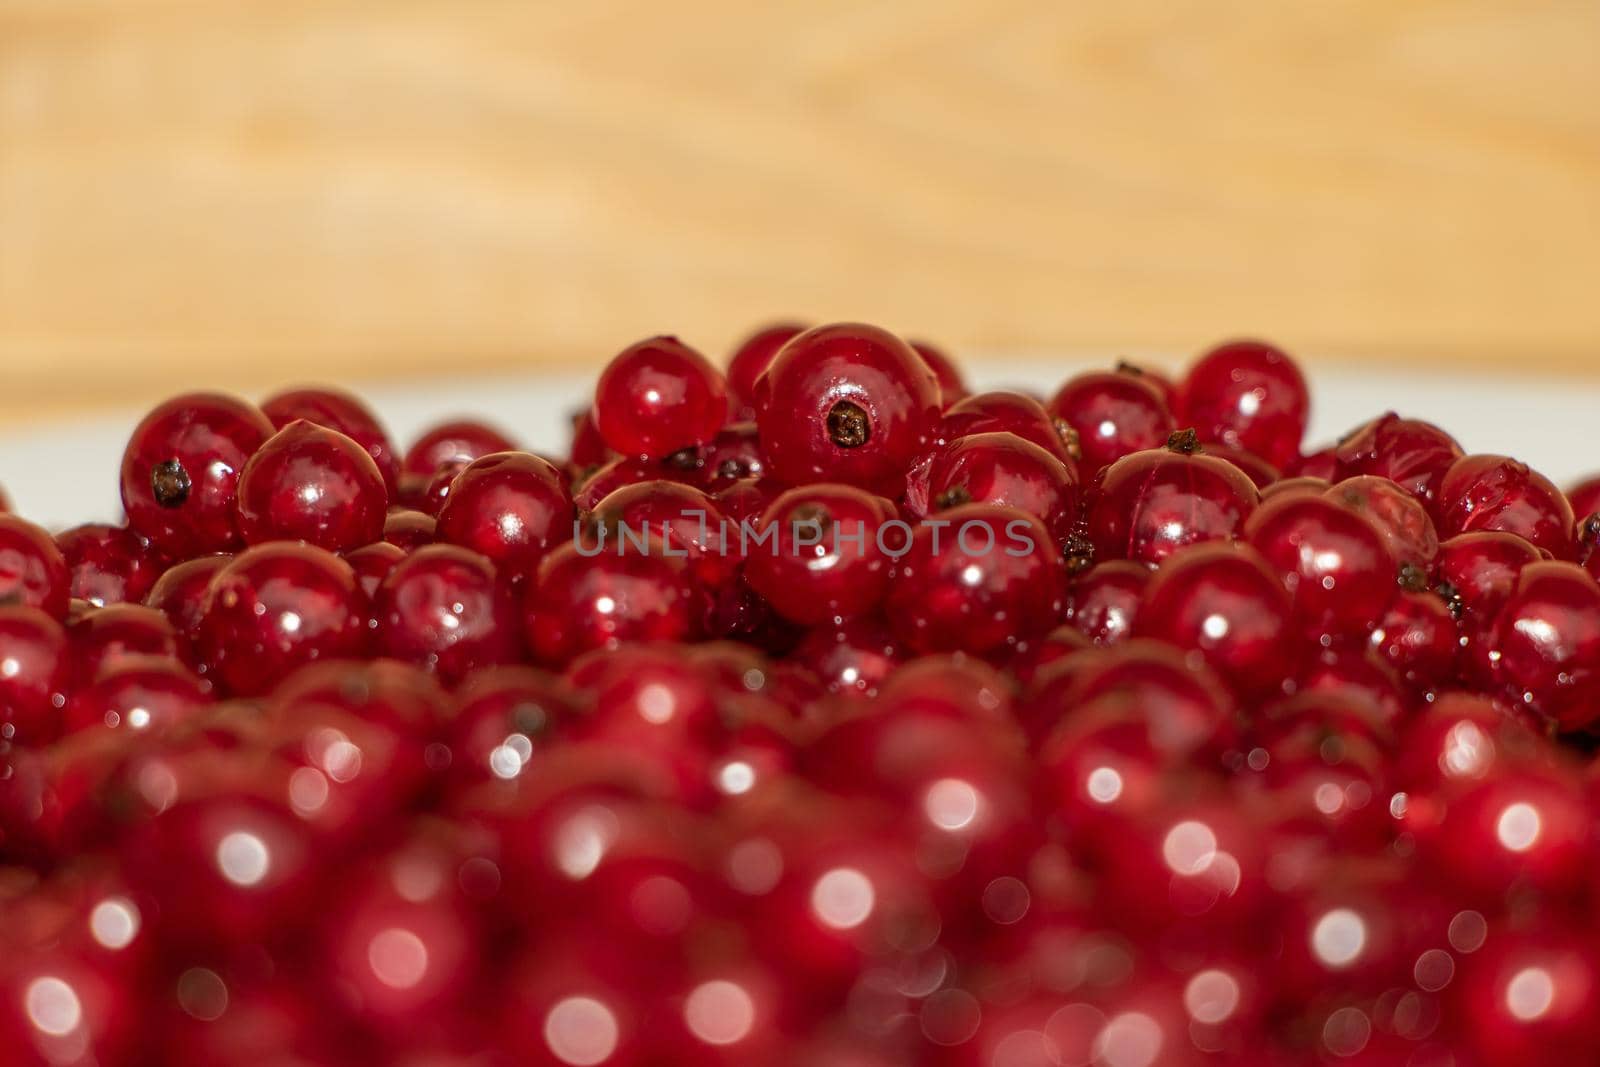 Red currant close up juicy and fresh.